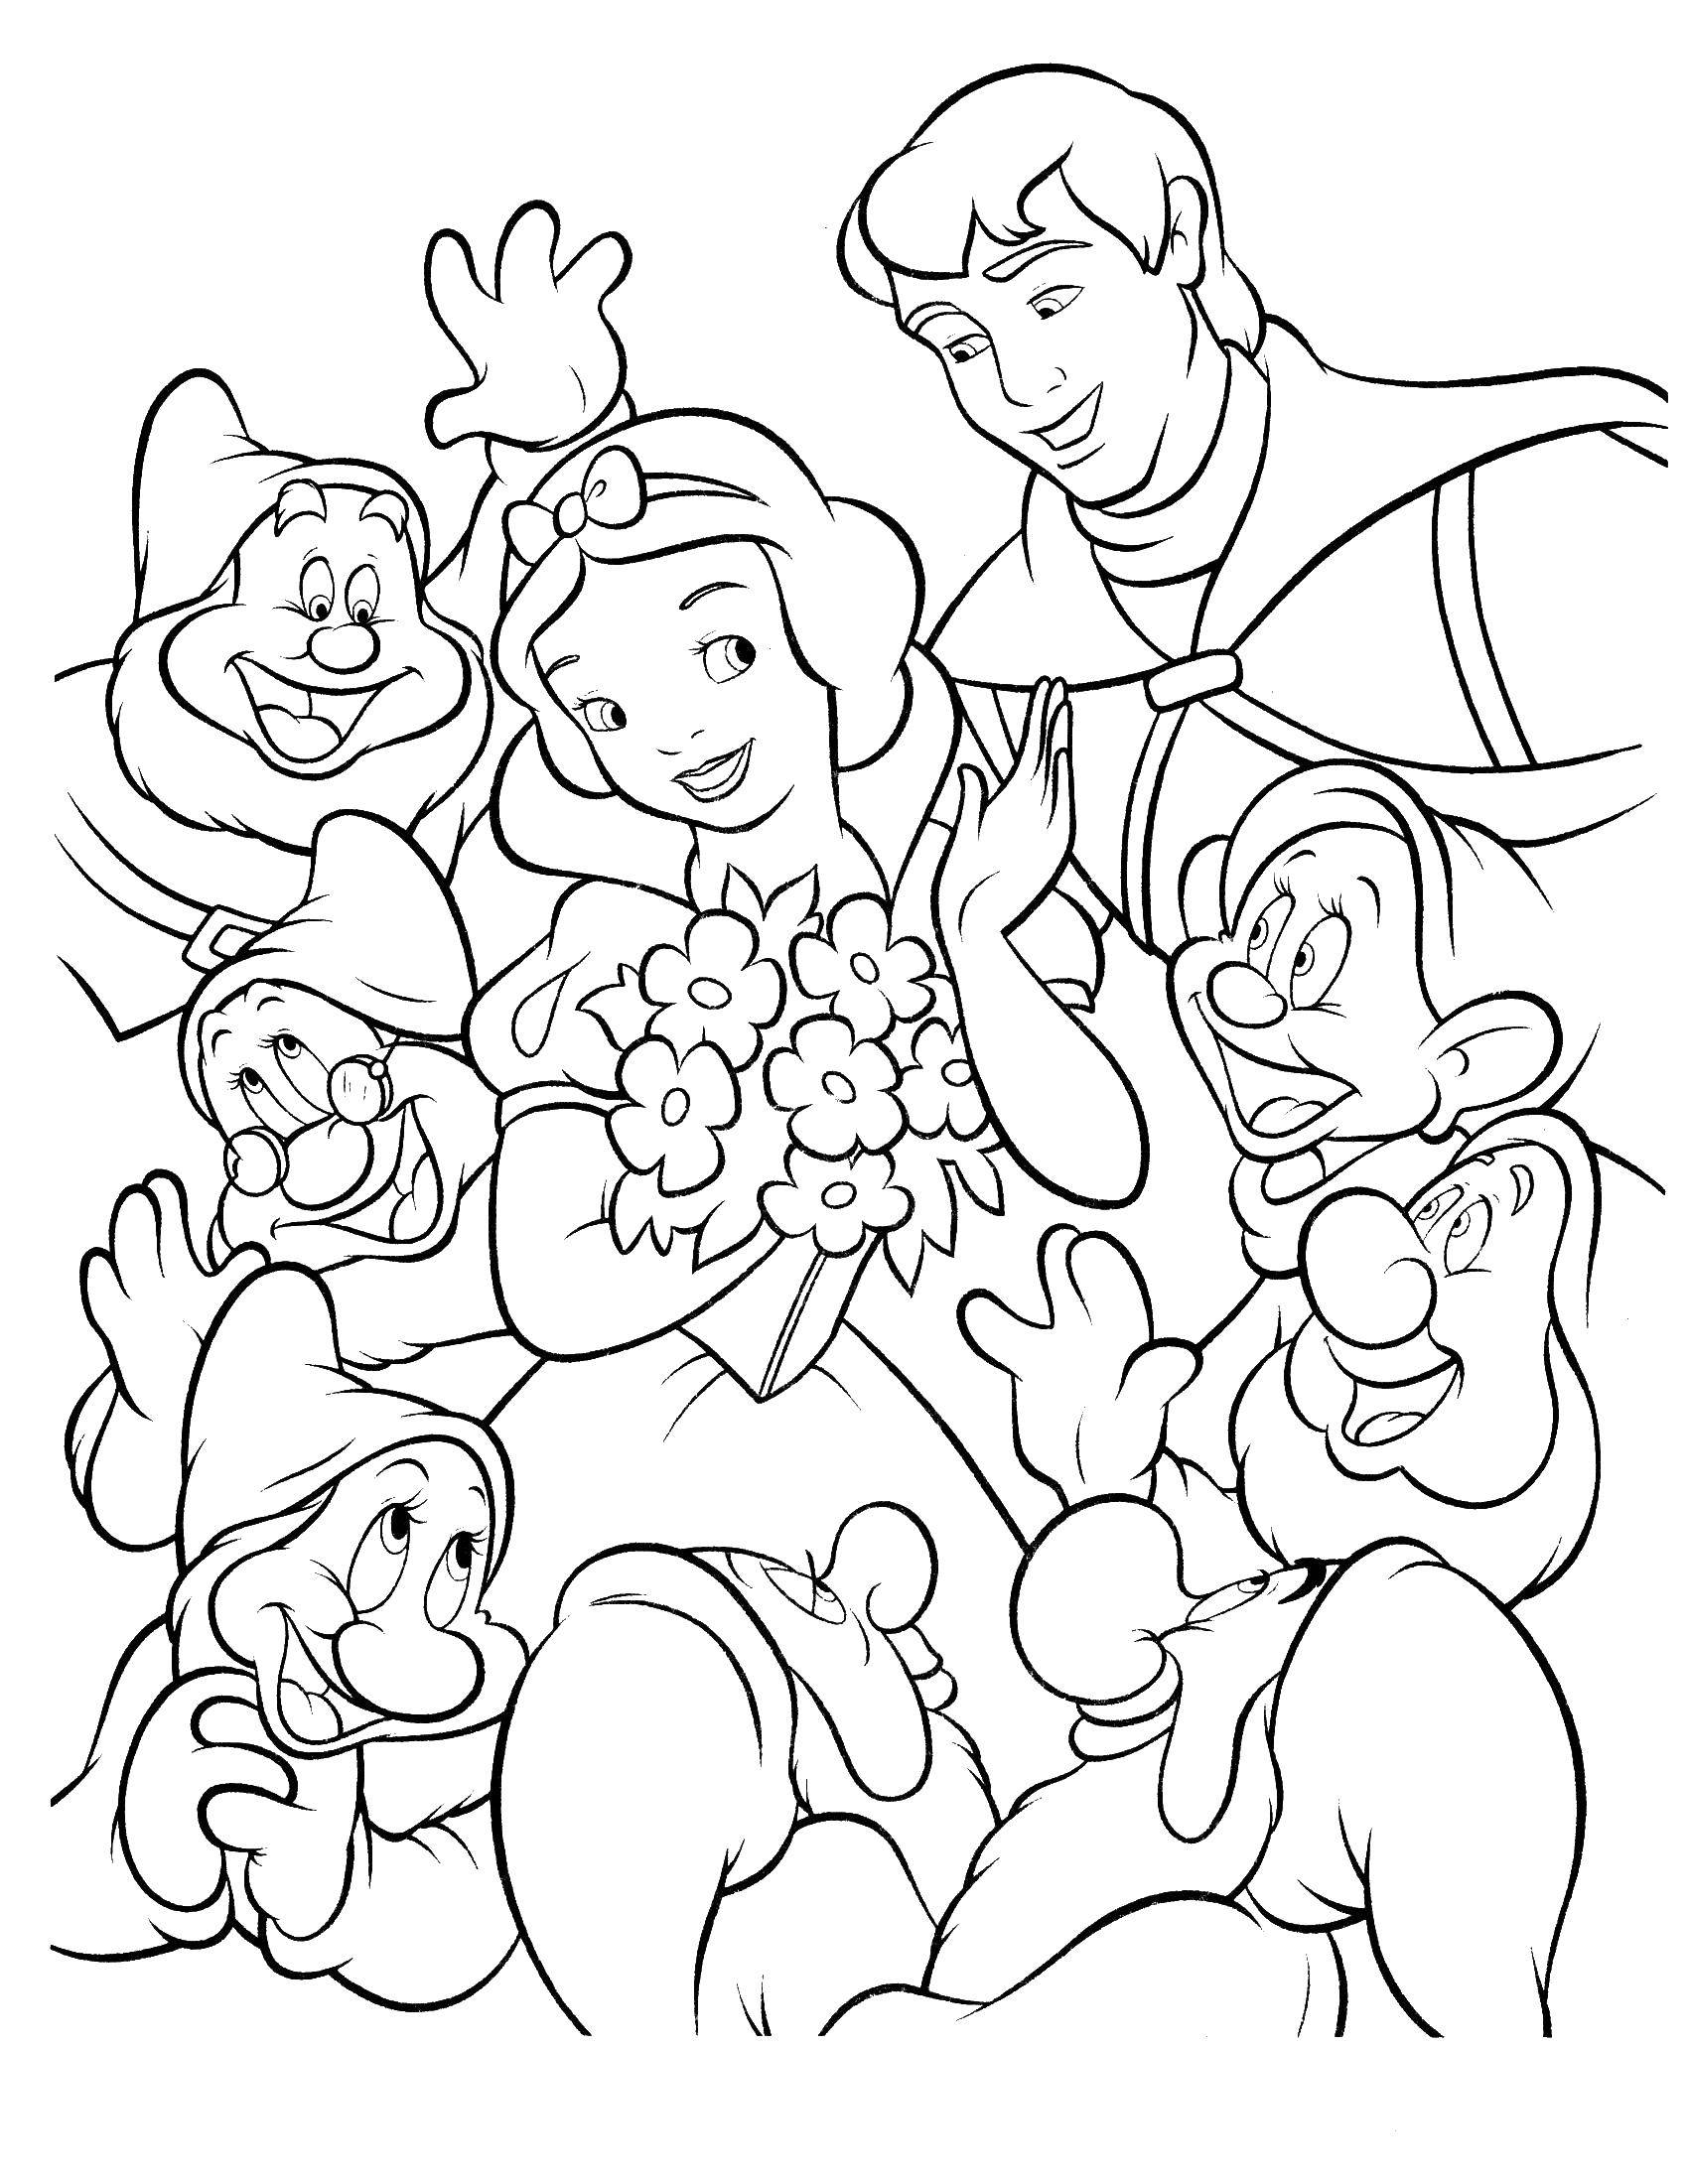 Coloring Snow white with Prince and dwarfs. Category snow white. Tags:  cartoons, fairy tales, Disney, Princess, snow white.